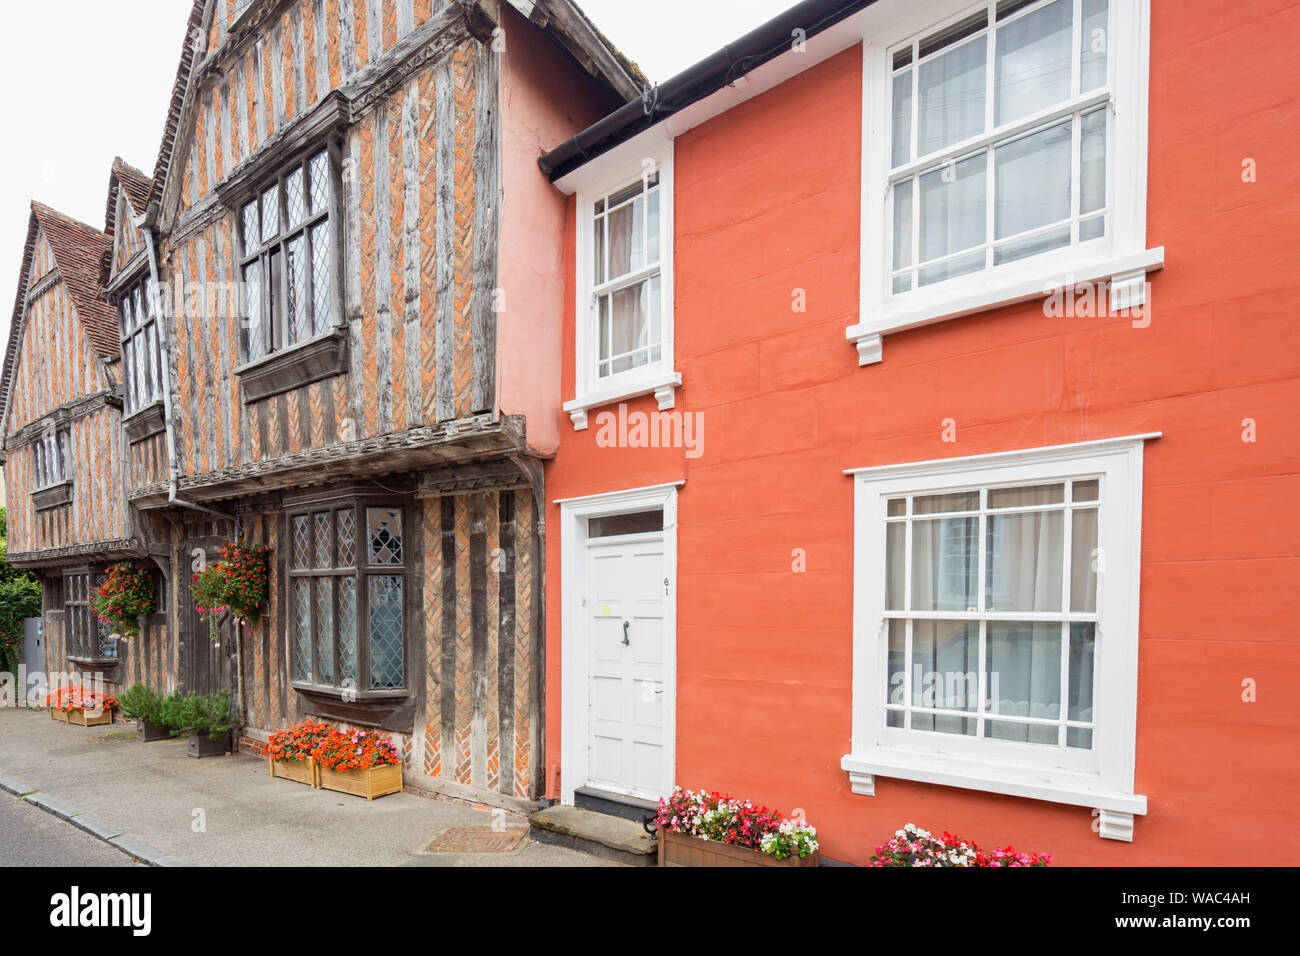 The picturesque medieval village of Lavenham, Suffolk, England, UK Stock Photo